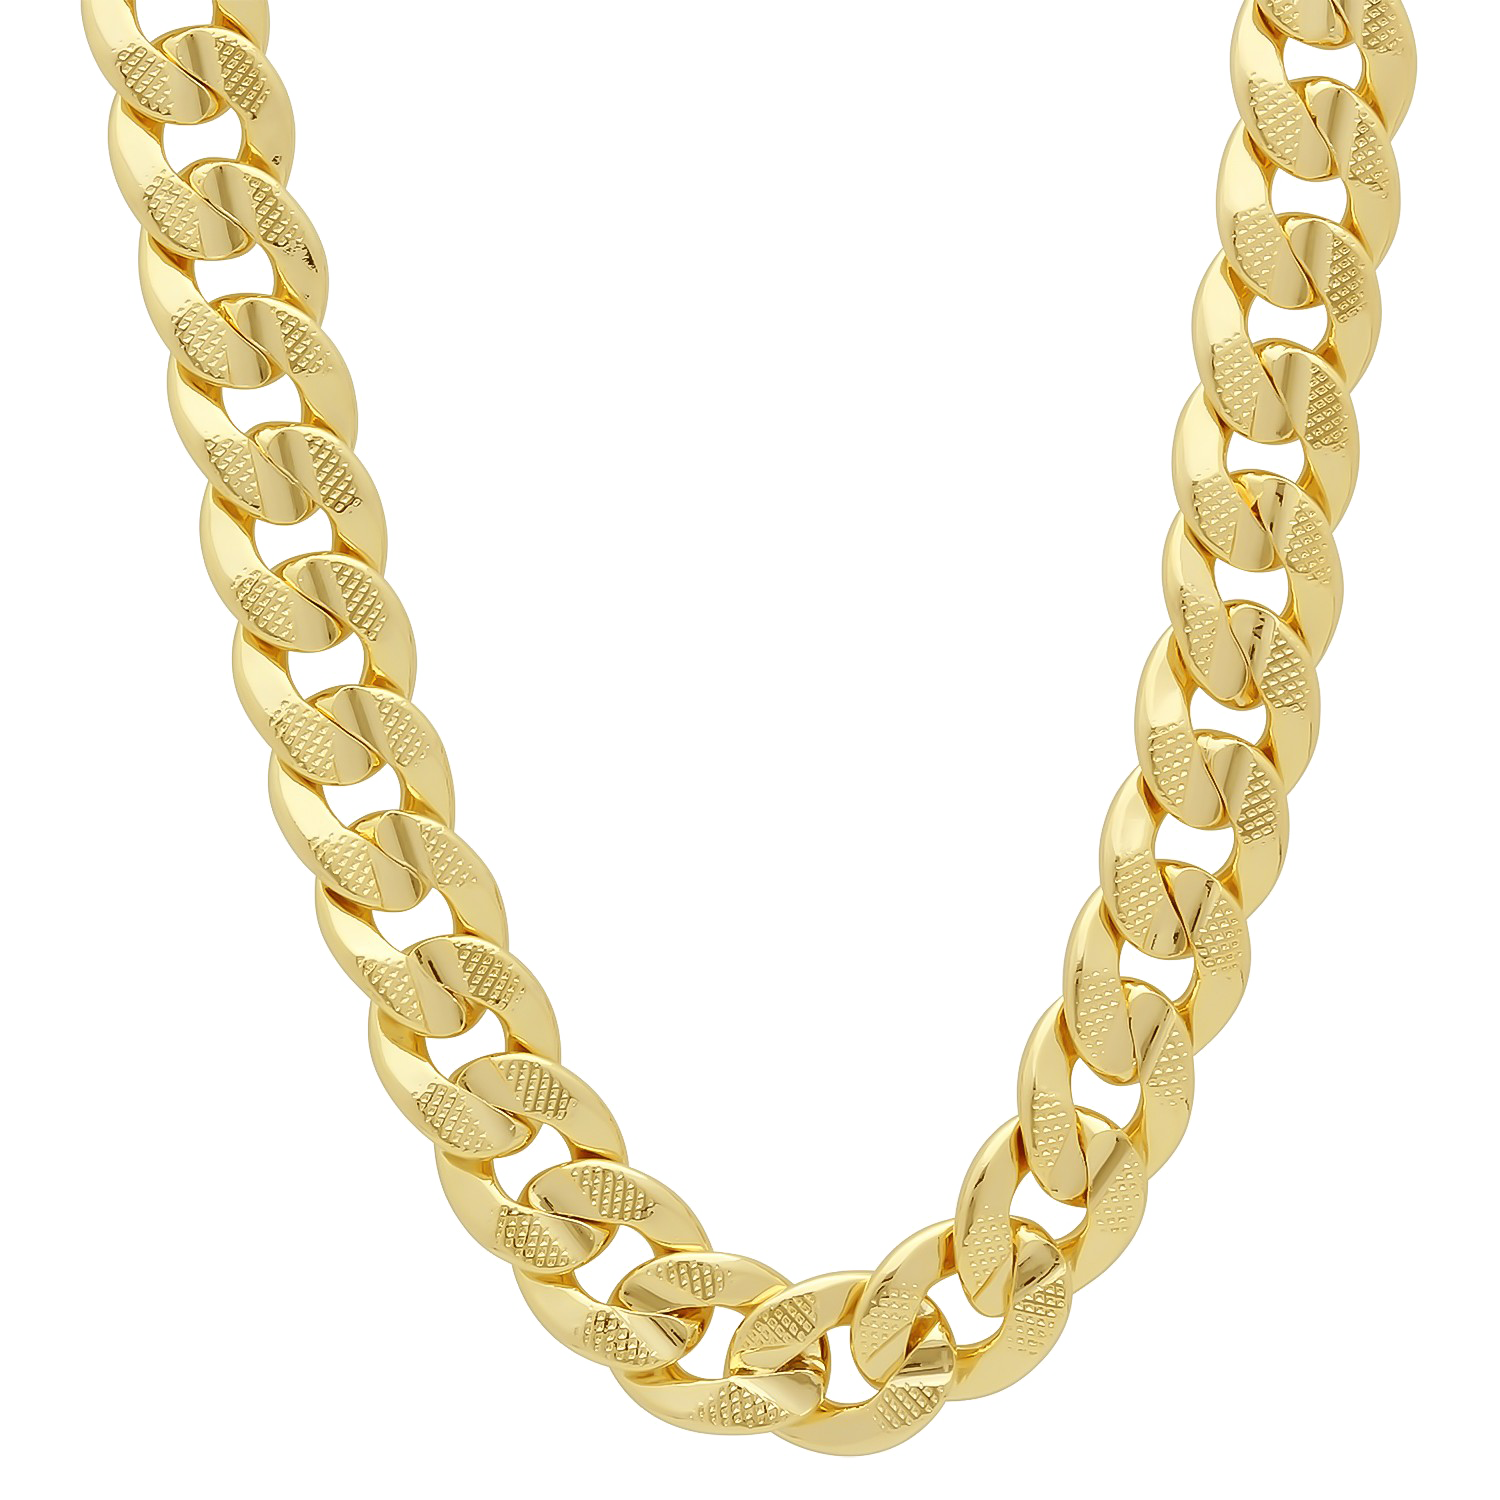 Thug Life Chain PNG Background Image